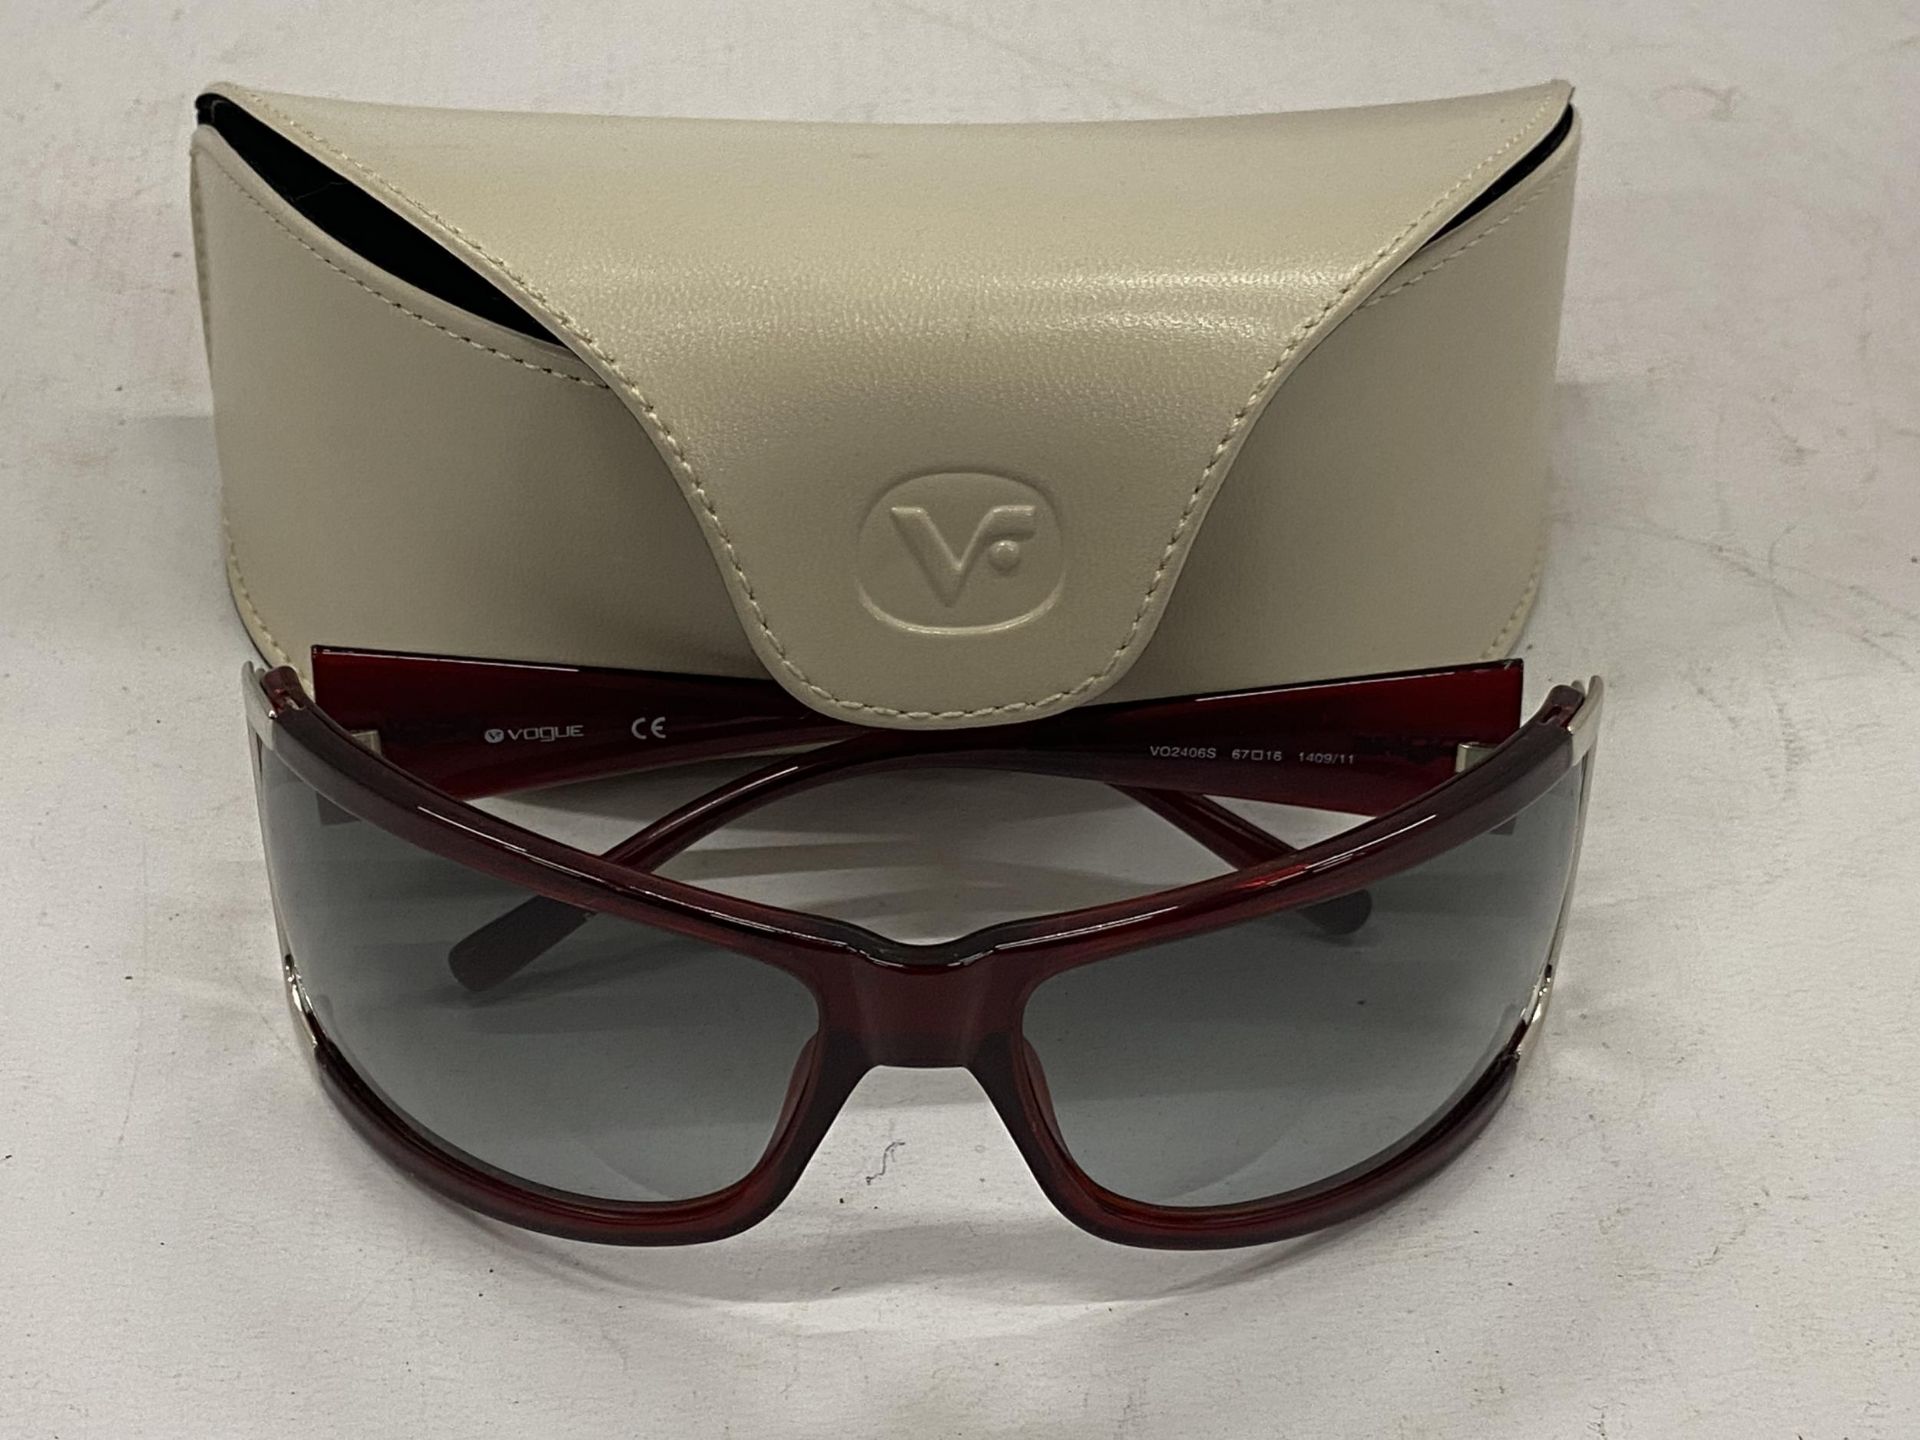 A PAIR OF VOGUE SUNGLASSES WITH CASE